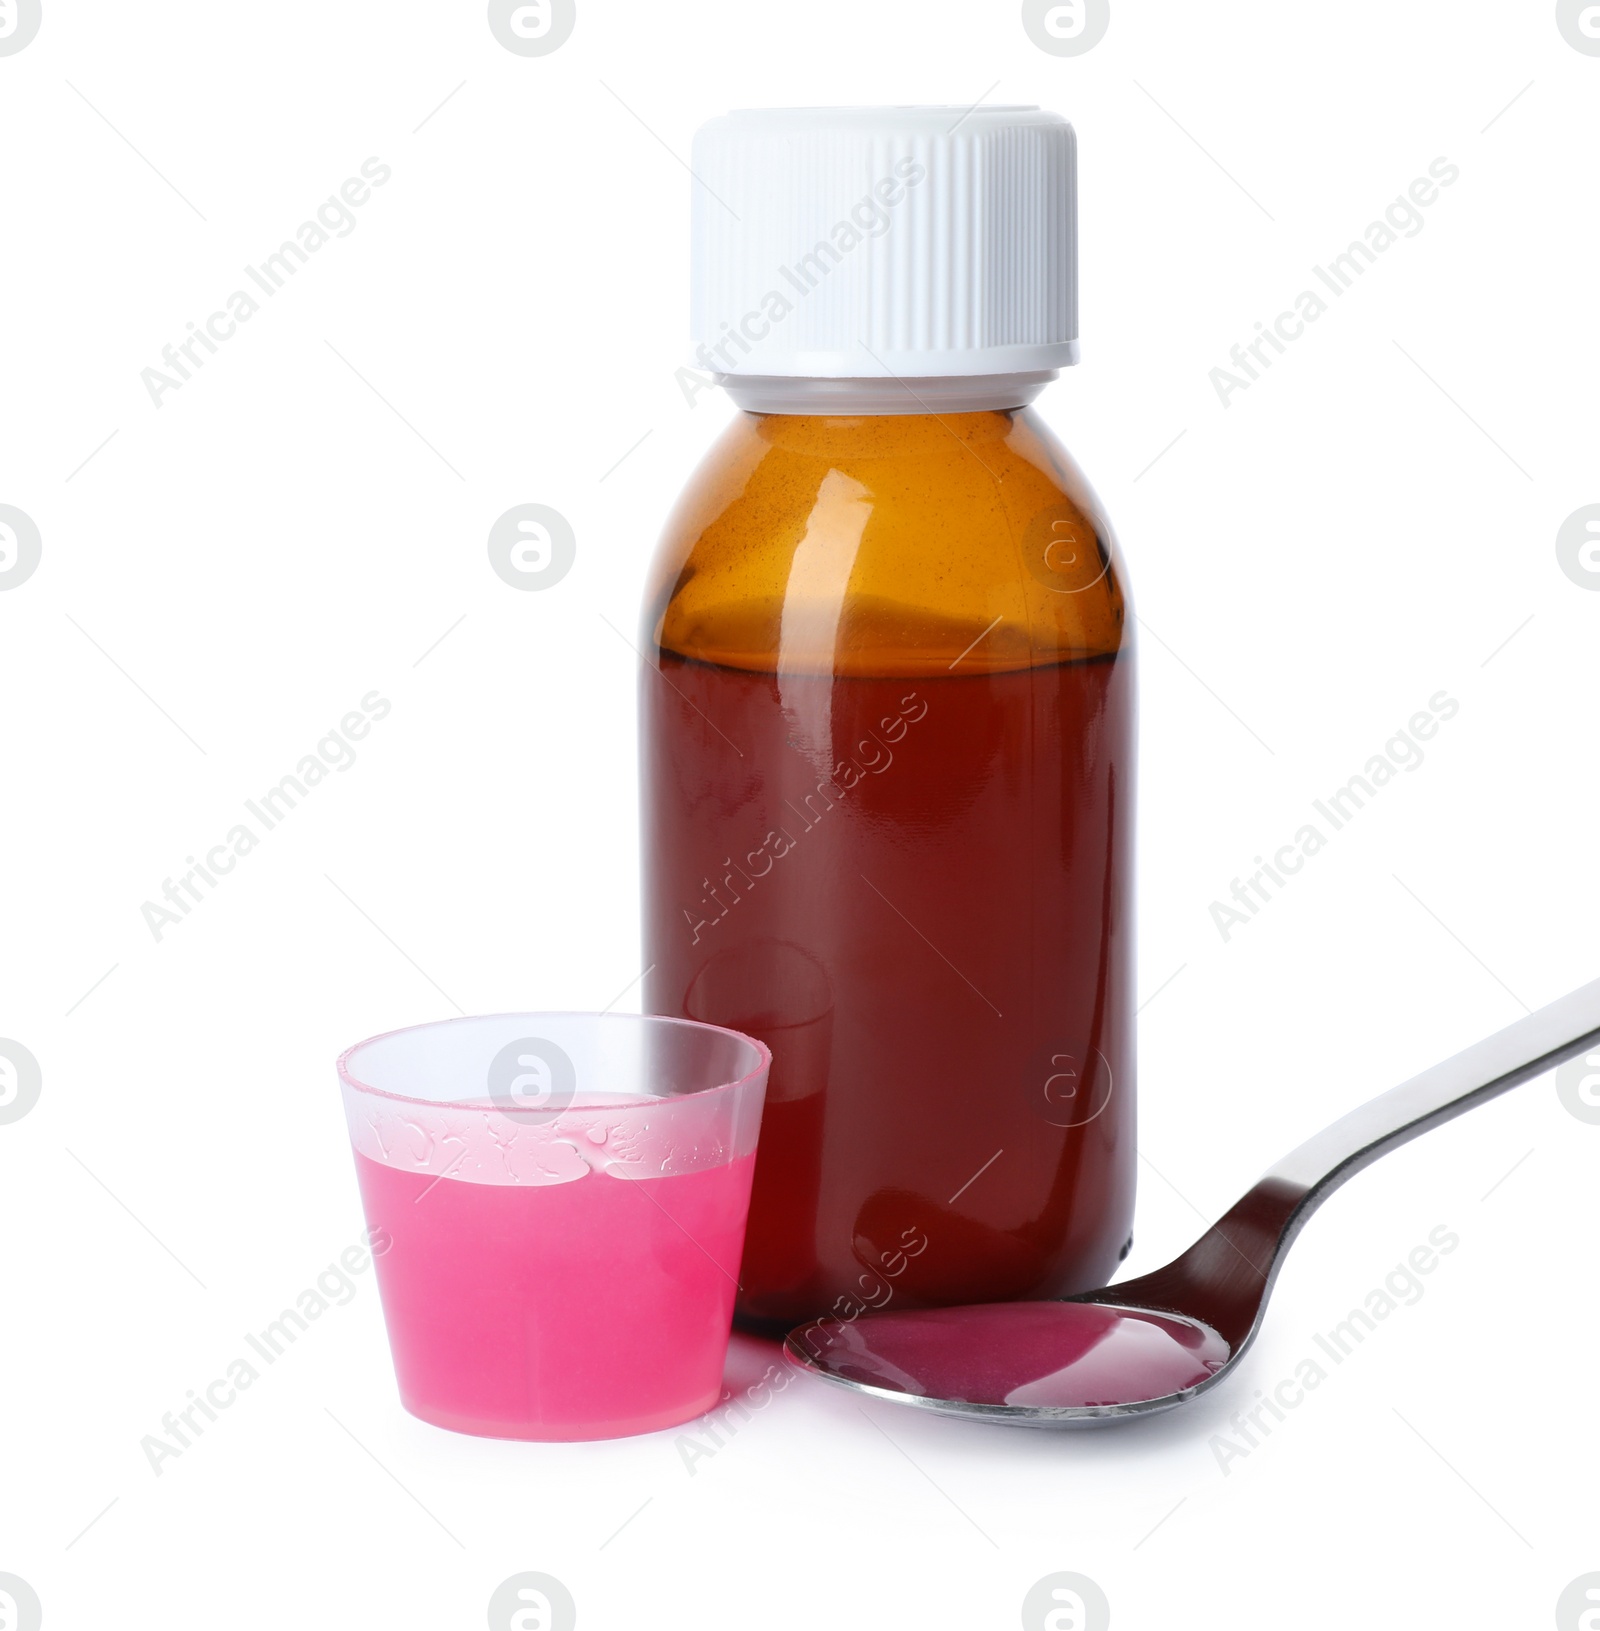 Photo of Spoon, measuring cup and bottle of cough syrup on white background